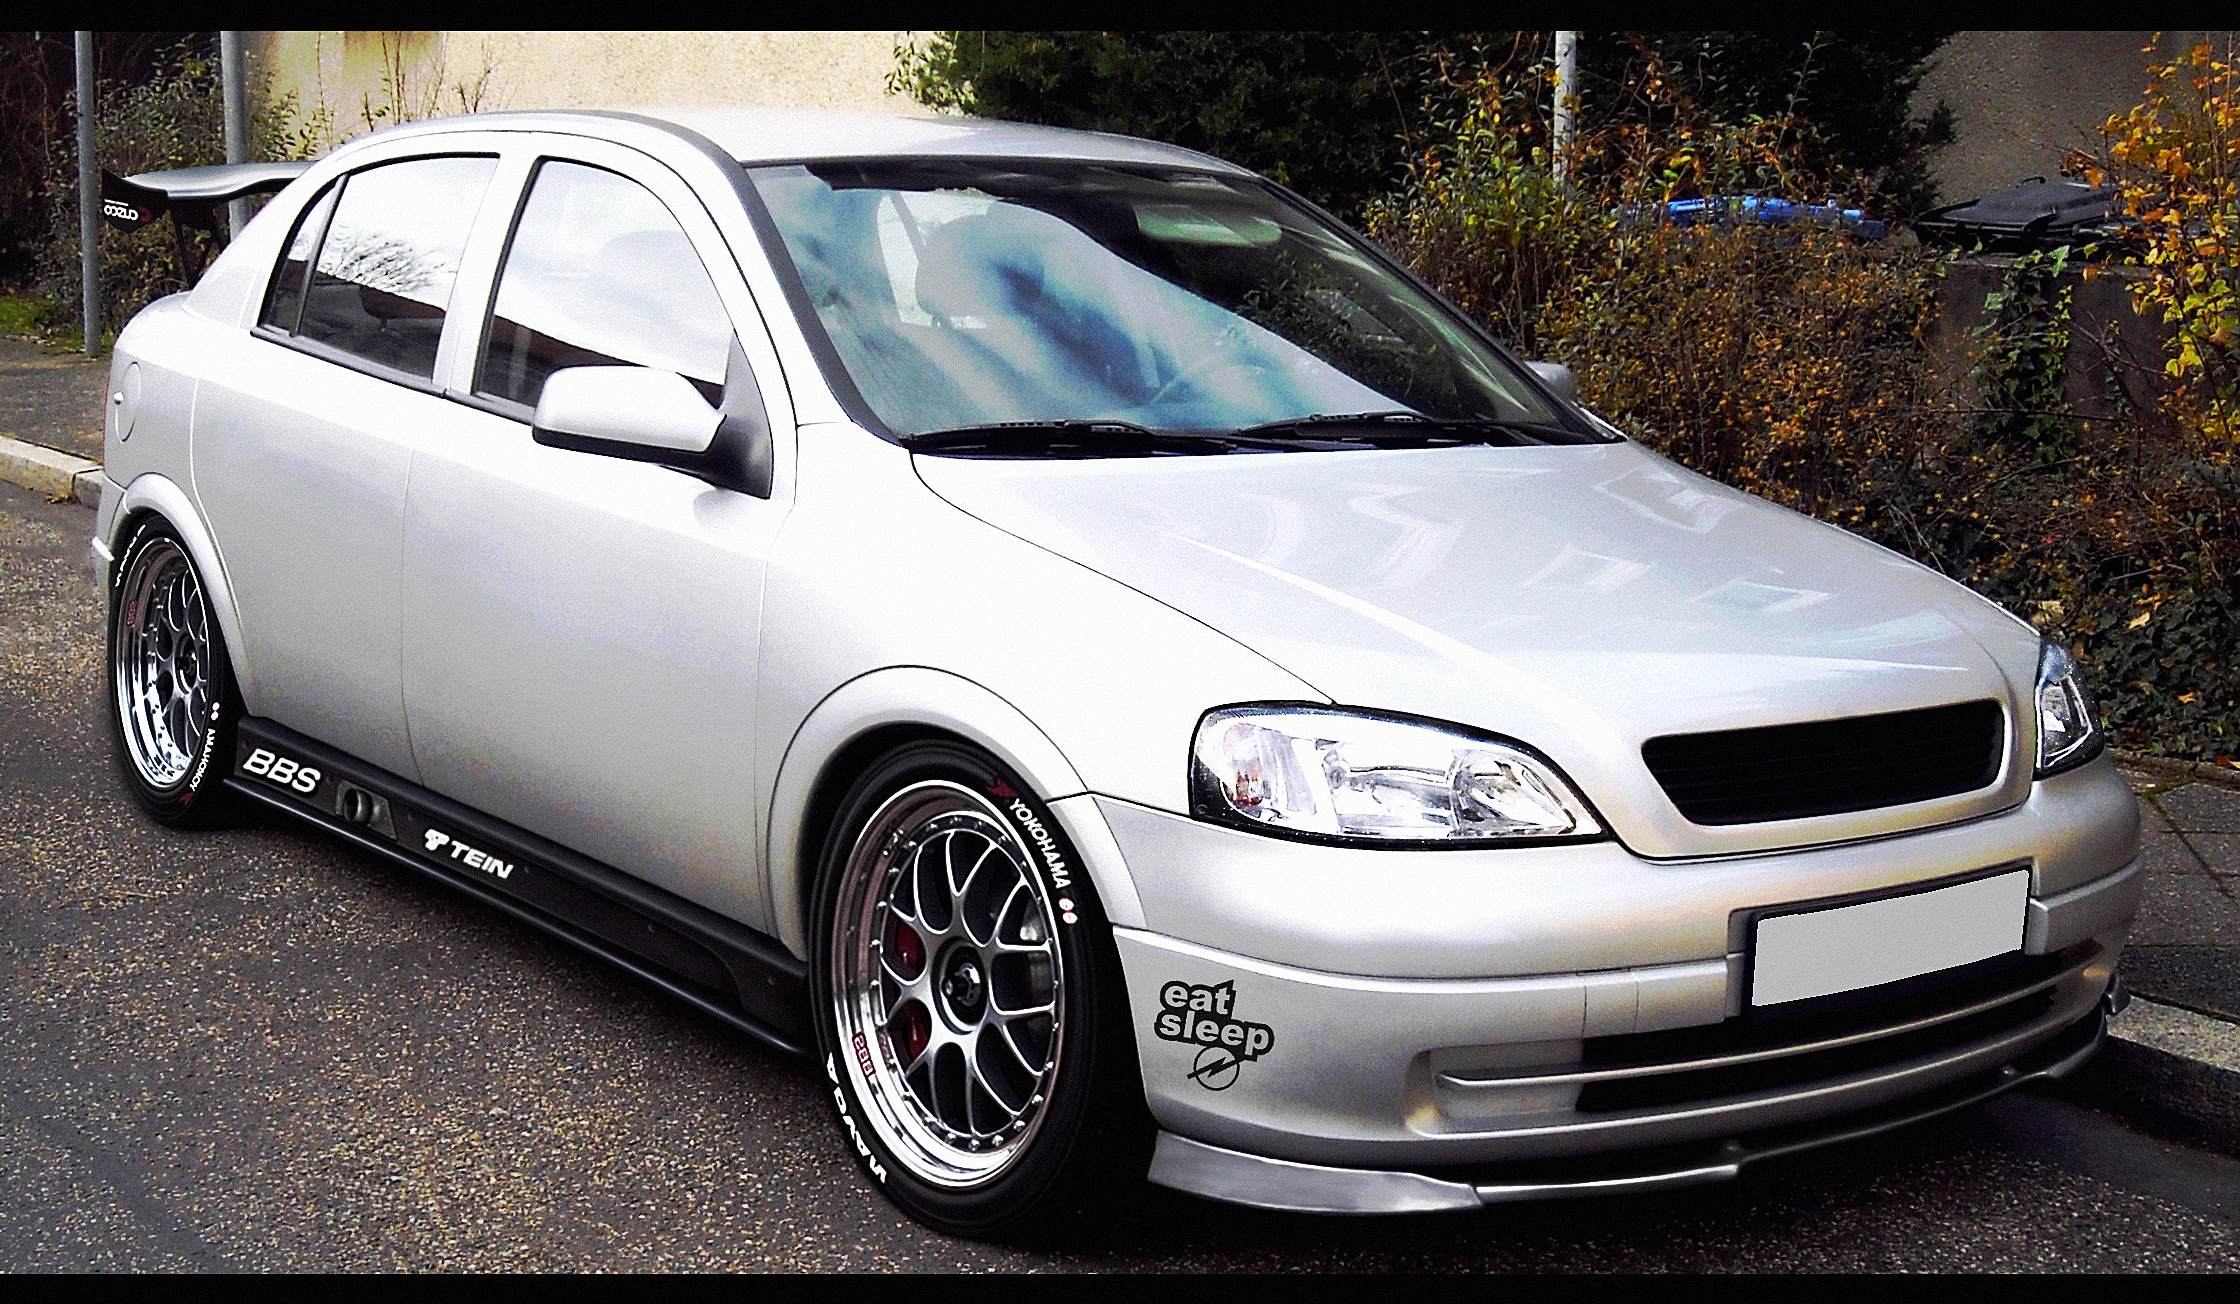 Opel Astra G front (Virtual Tuning Verion) by ThatGuyEddy on